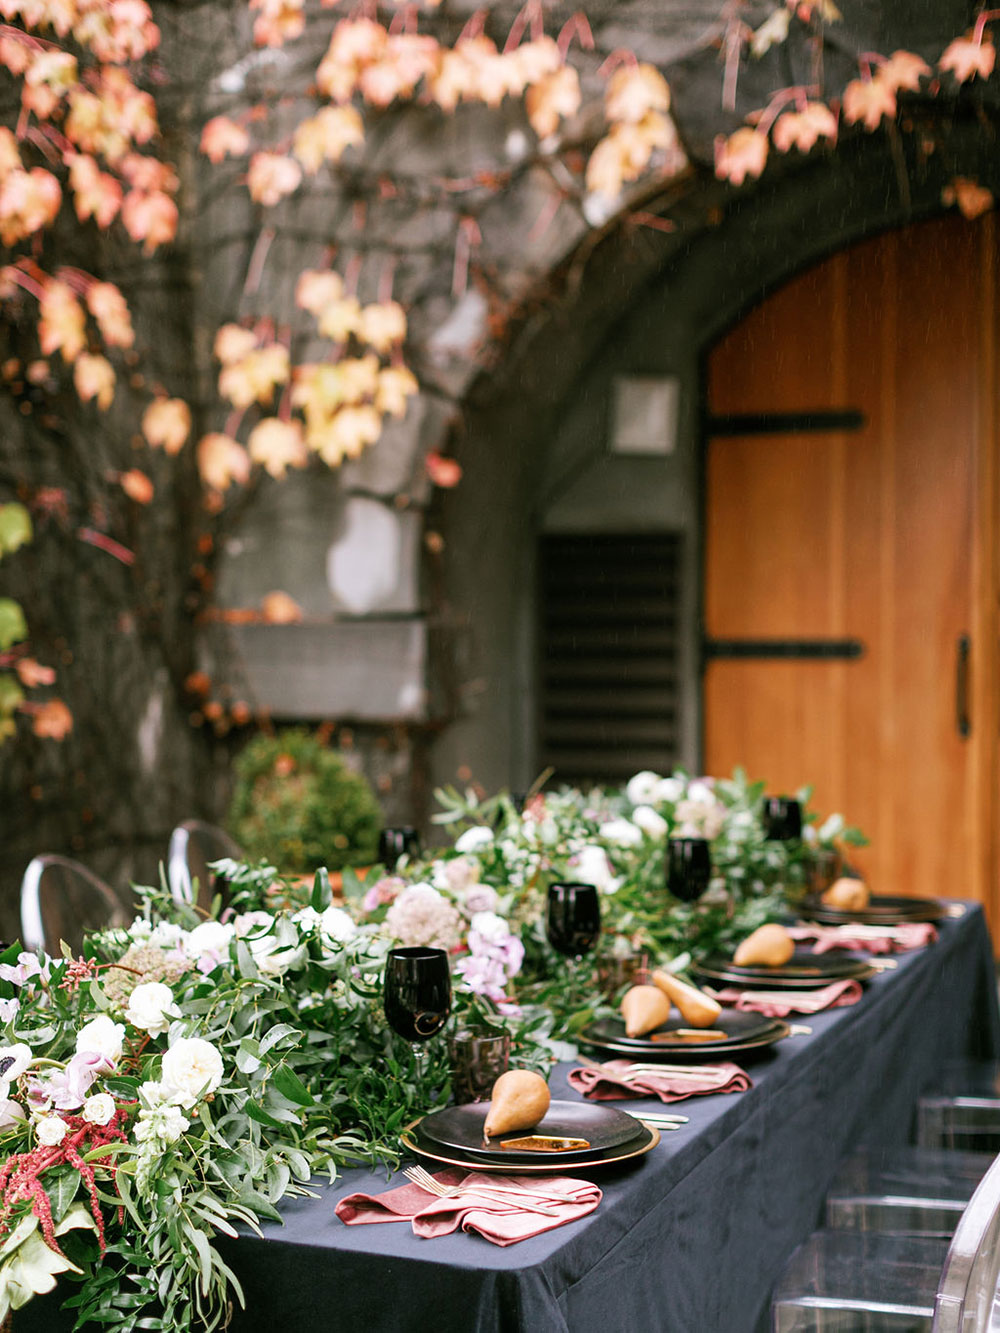 The wedding tablescape was done with a grey tablecloth, pink napkins, black plates and glasses and a lush greenery runner